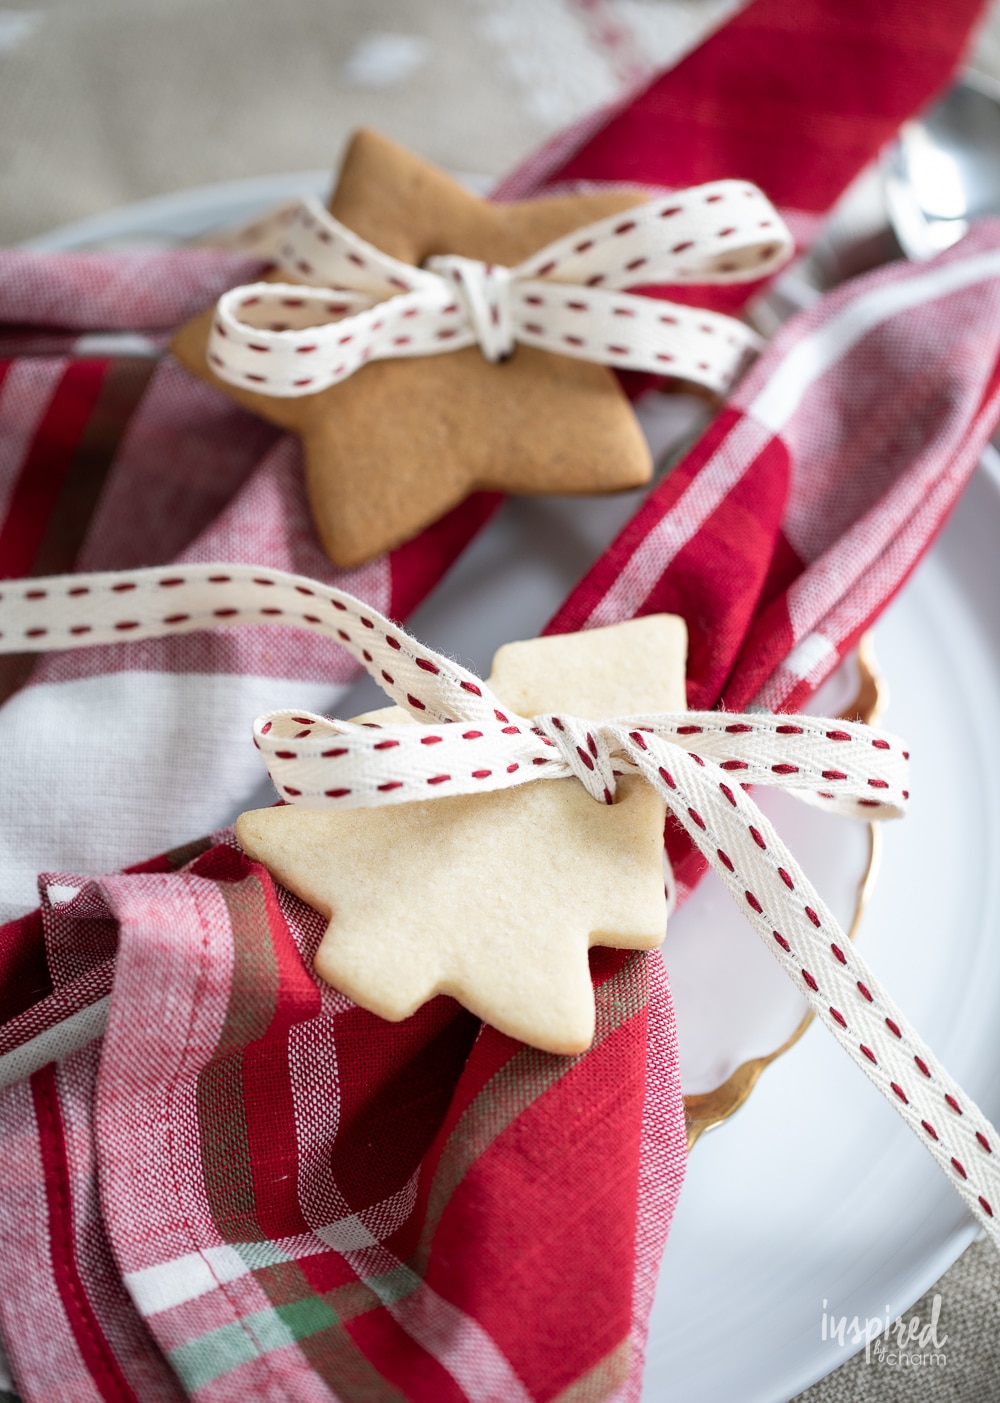 two cookies and ribbon tied around a napkin for a napkin ring.